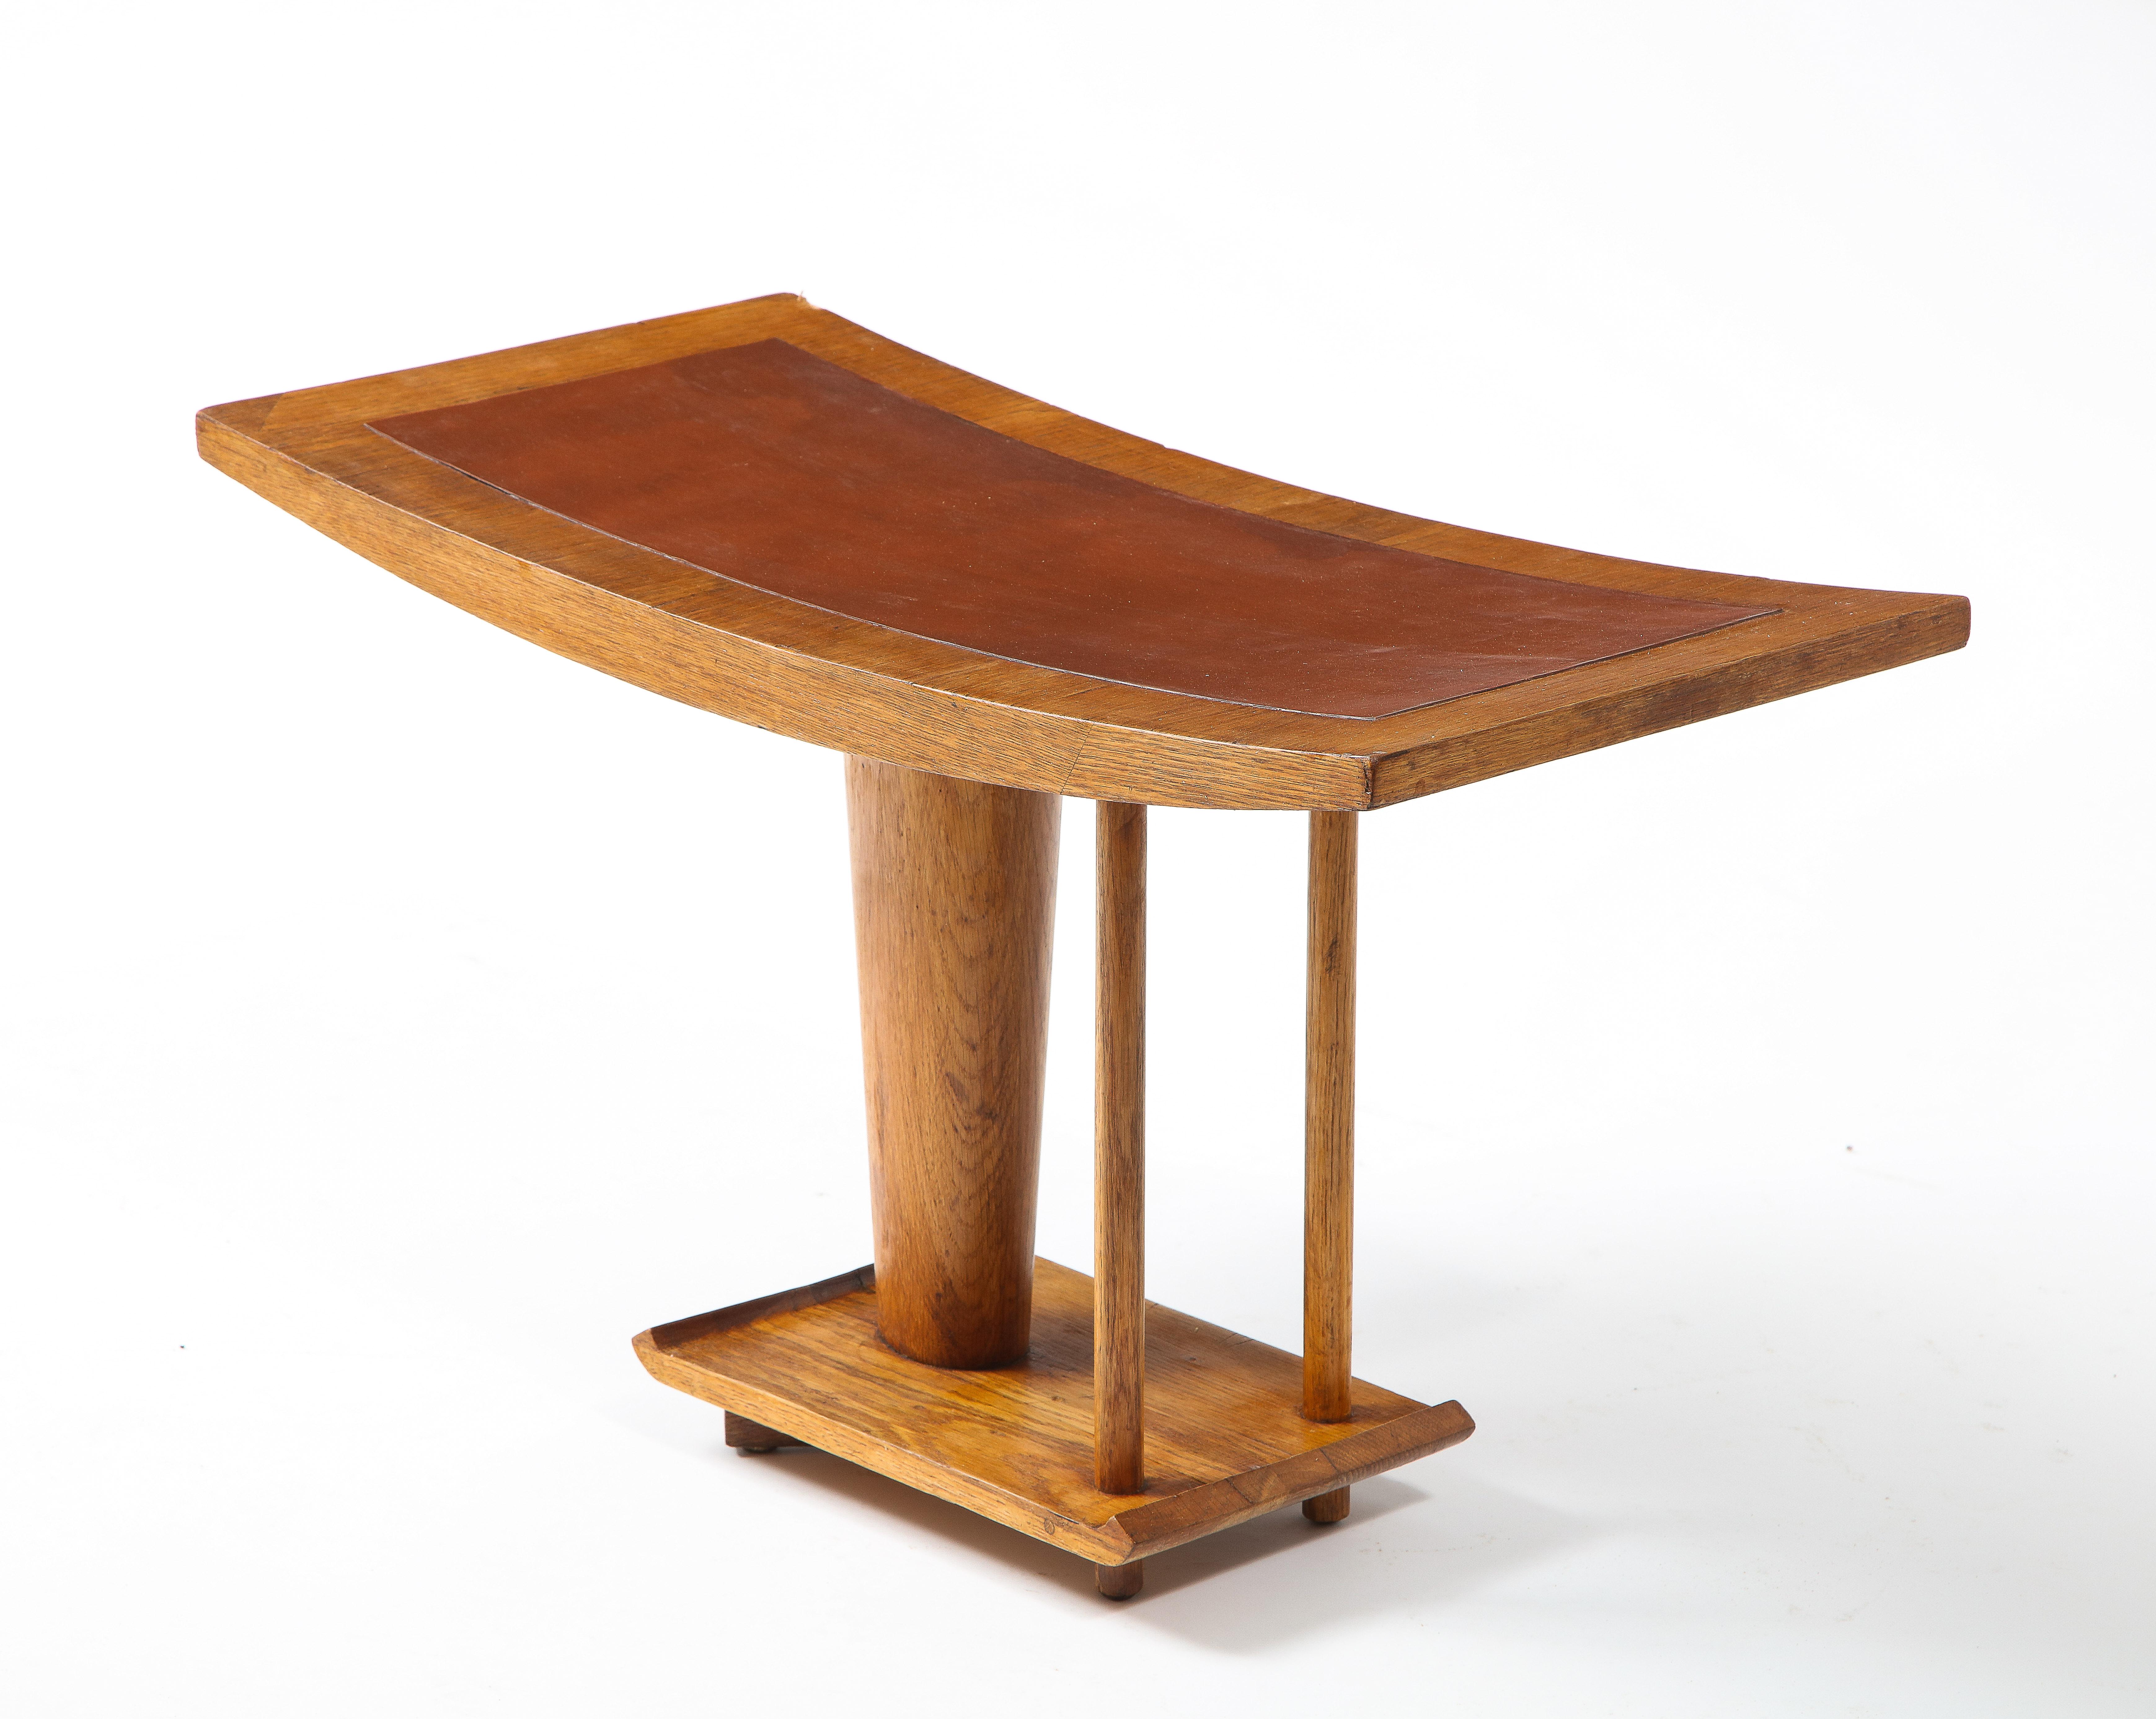 20th Century Curule Stool in Leather & Oak, France 1940's For Sale